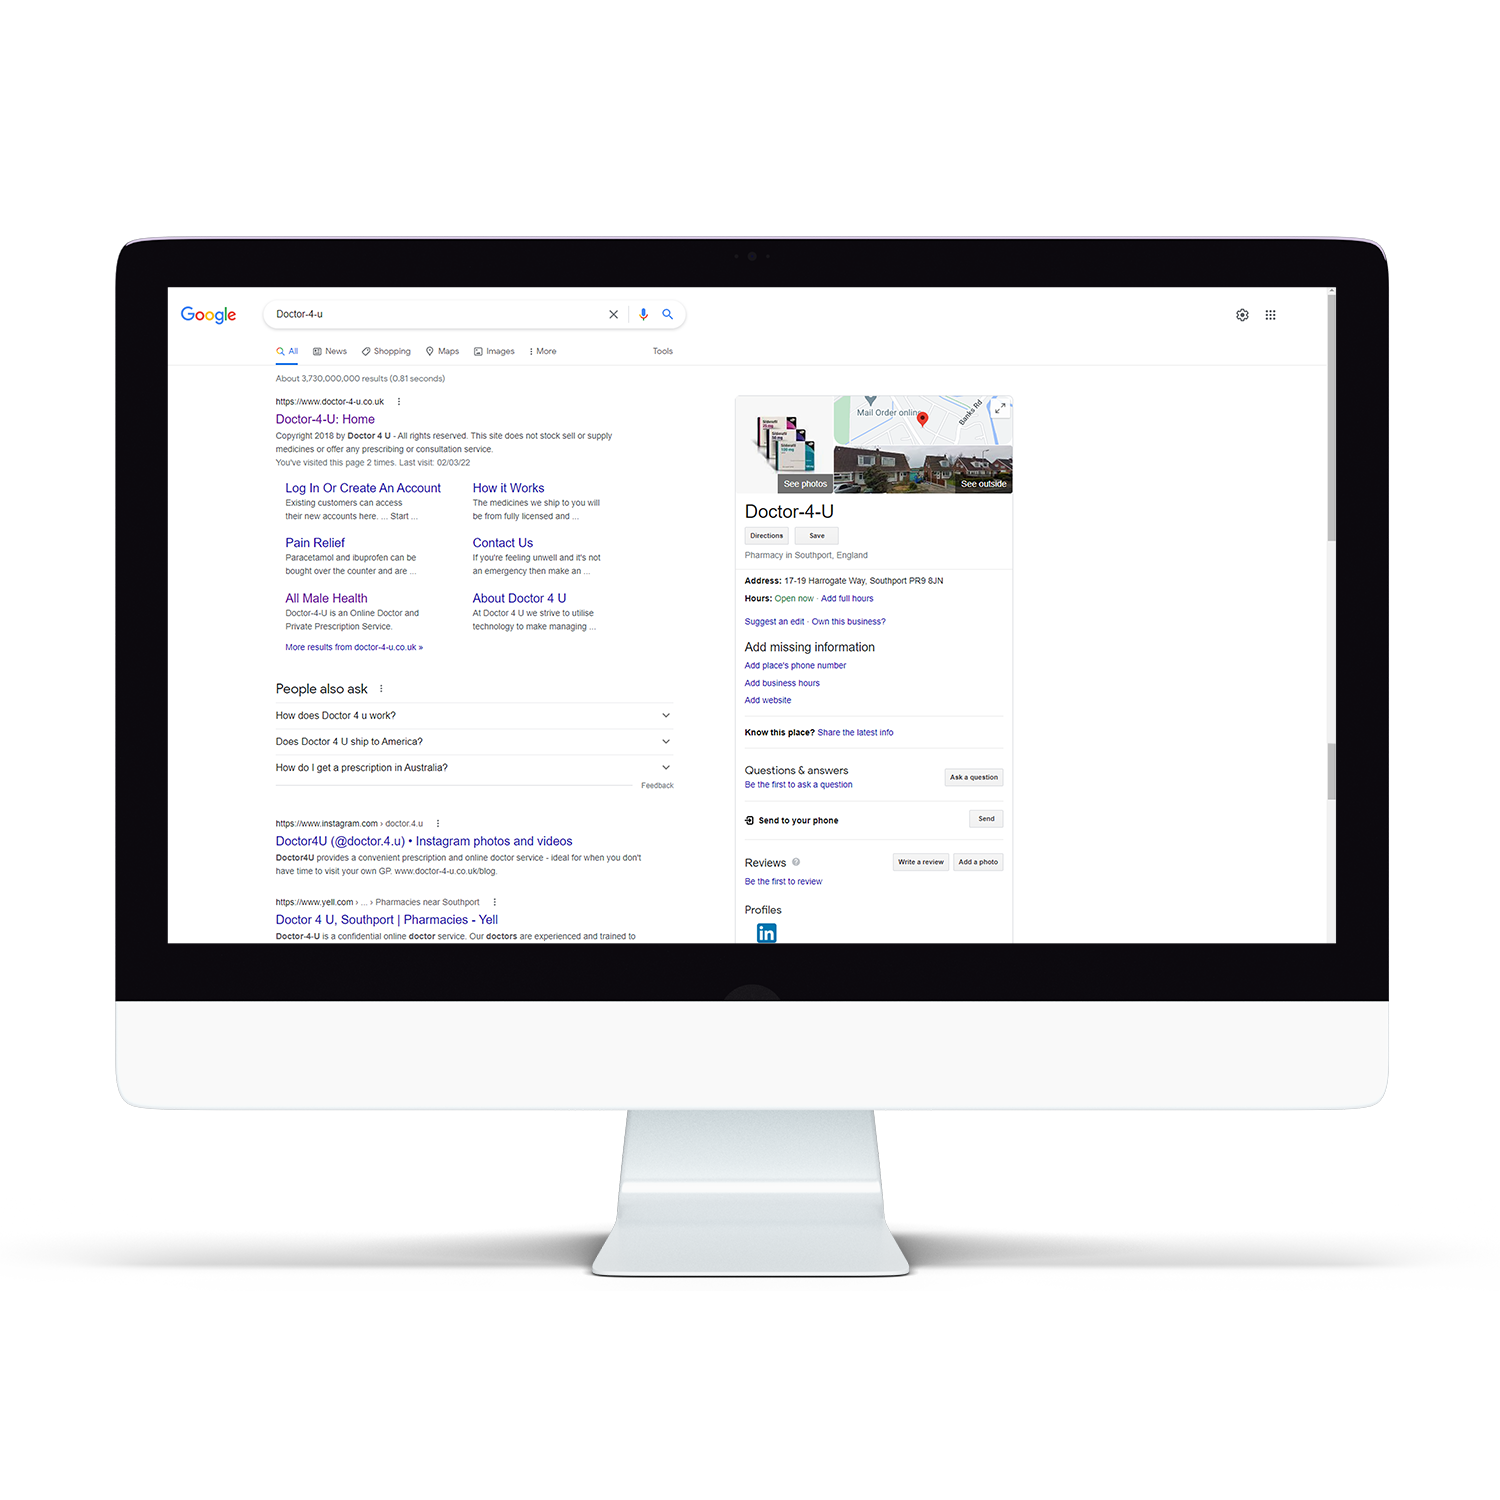 Mock up of an iMac screen with the Google search results page for Doctor4U